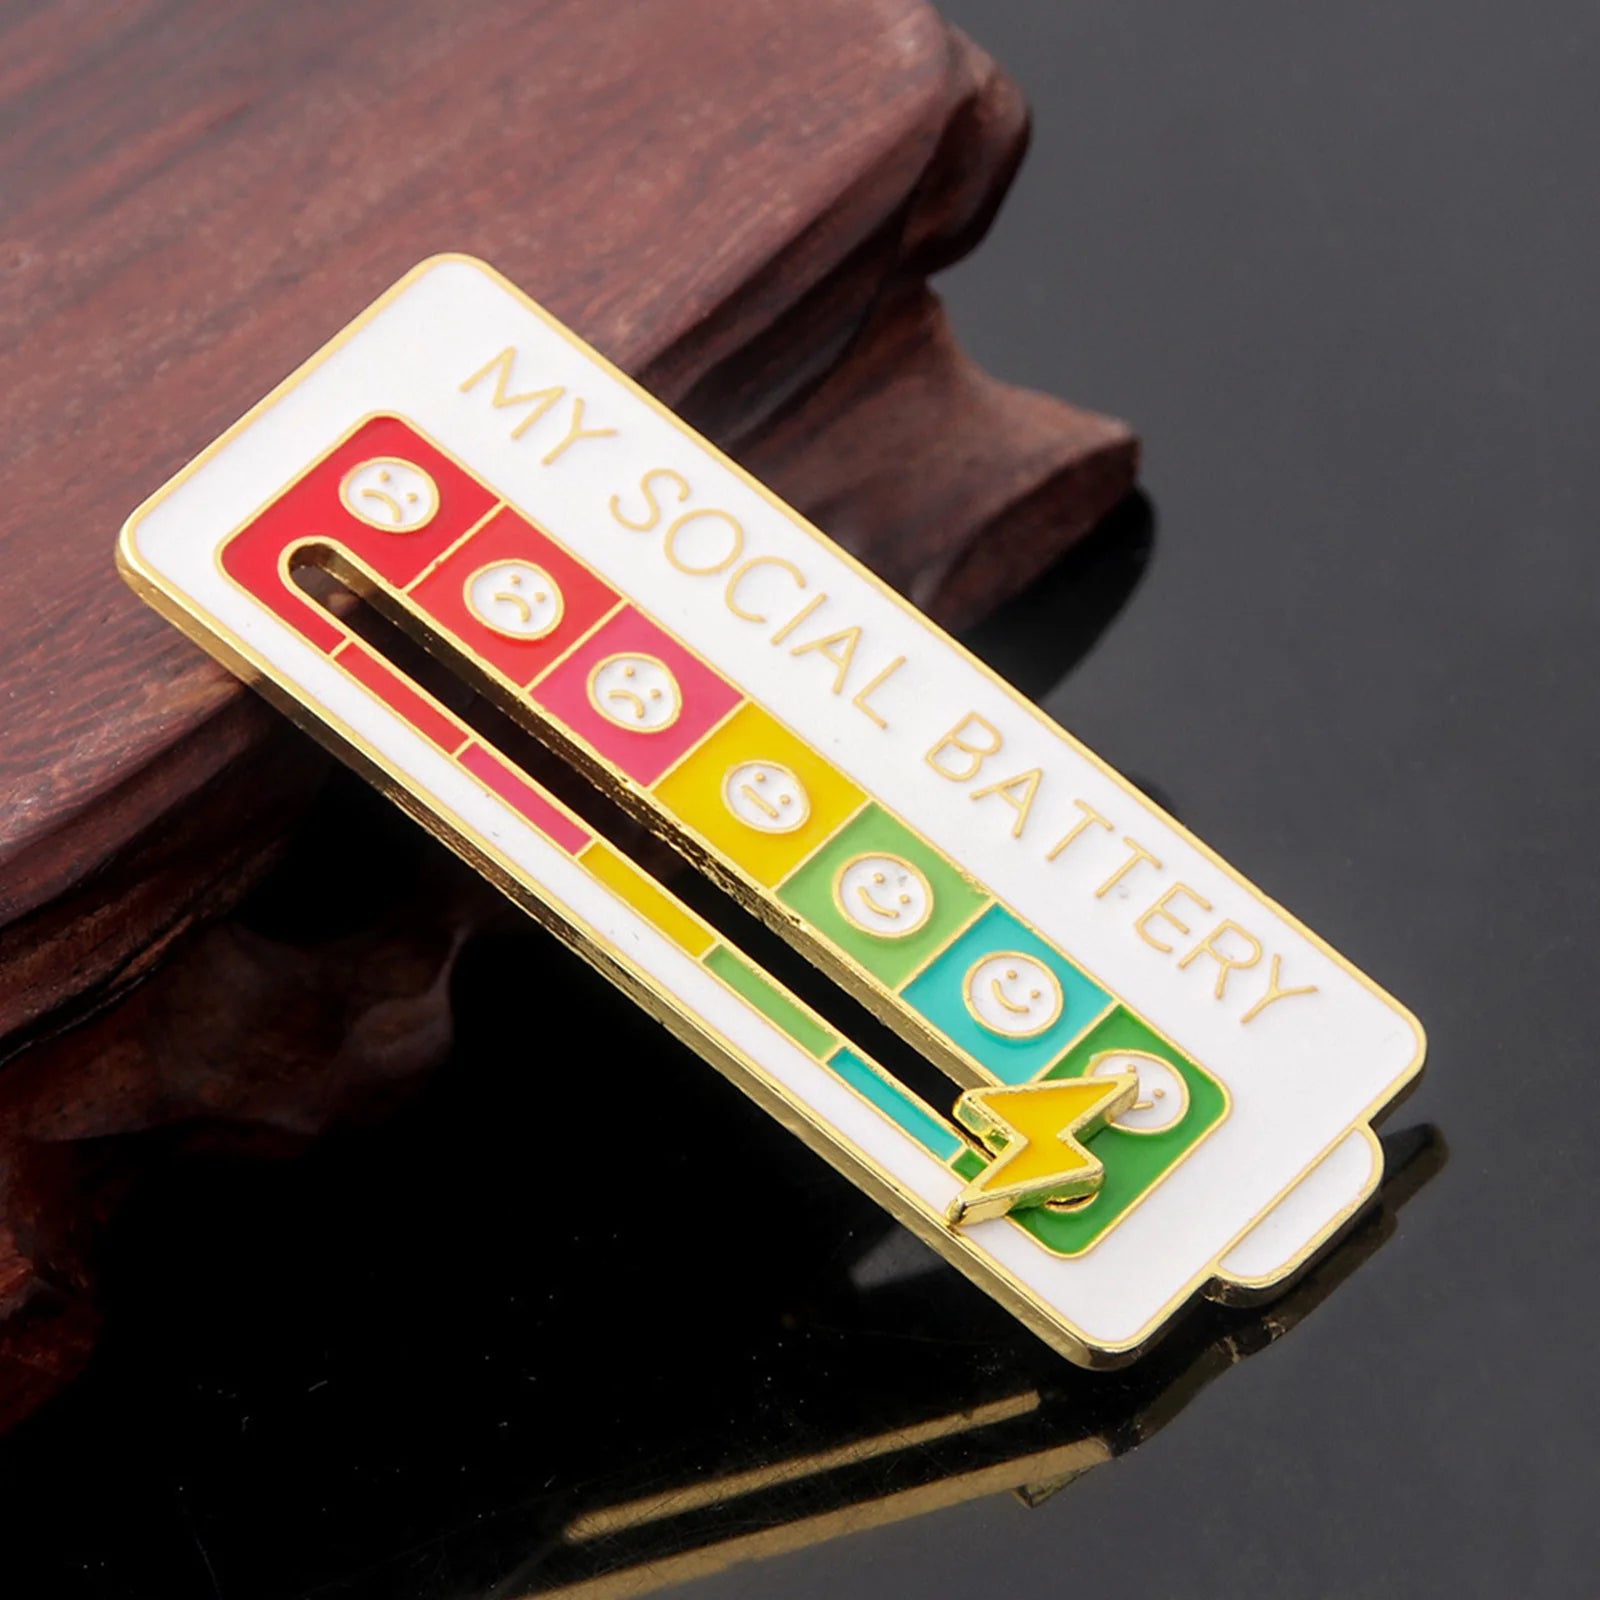 EmotionTrend Pins: Social Battery Mood Tracker Enamel Metal Brooch Badges, Fashion Jewelry Accessory Gift